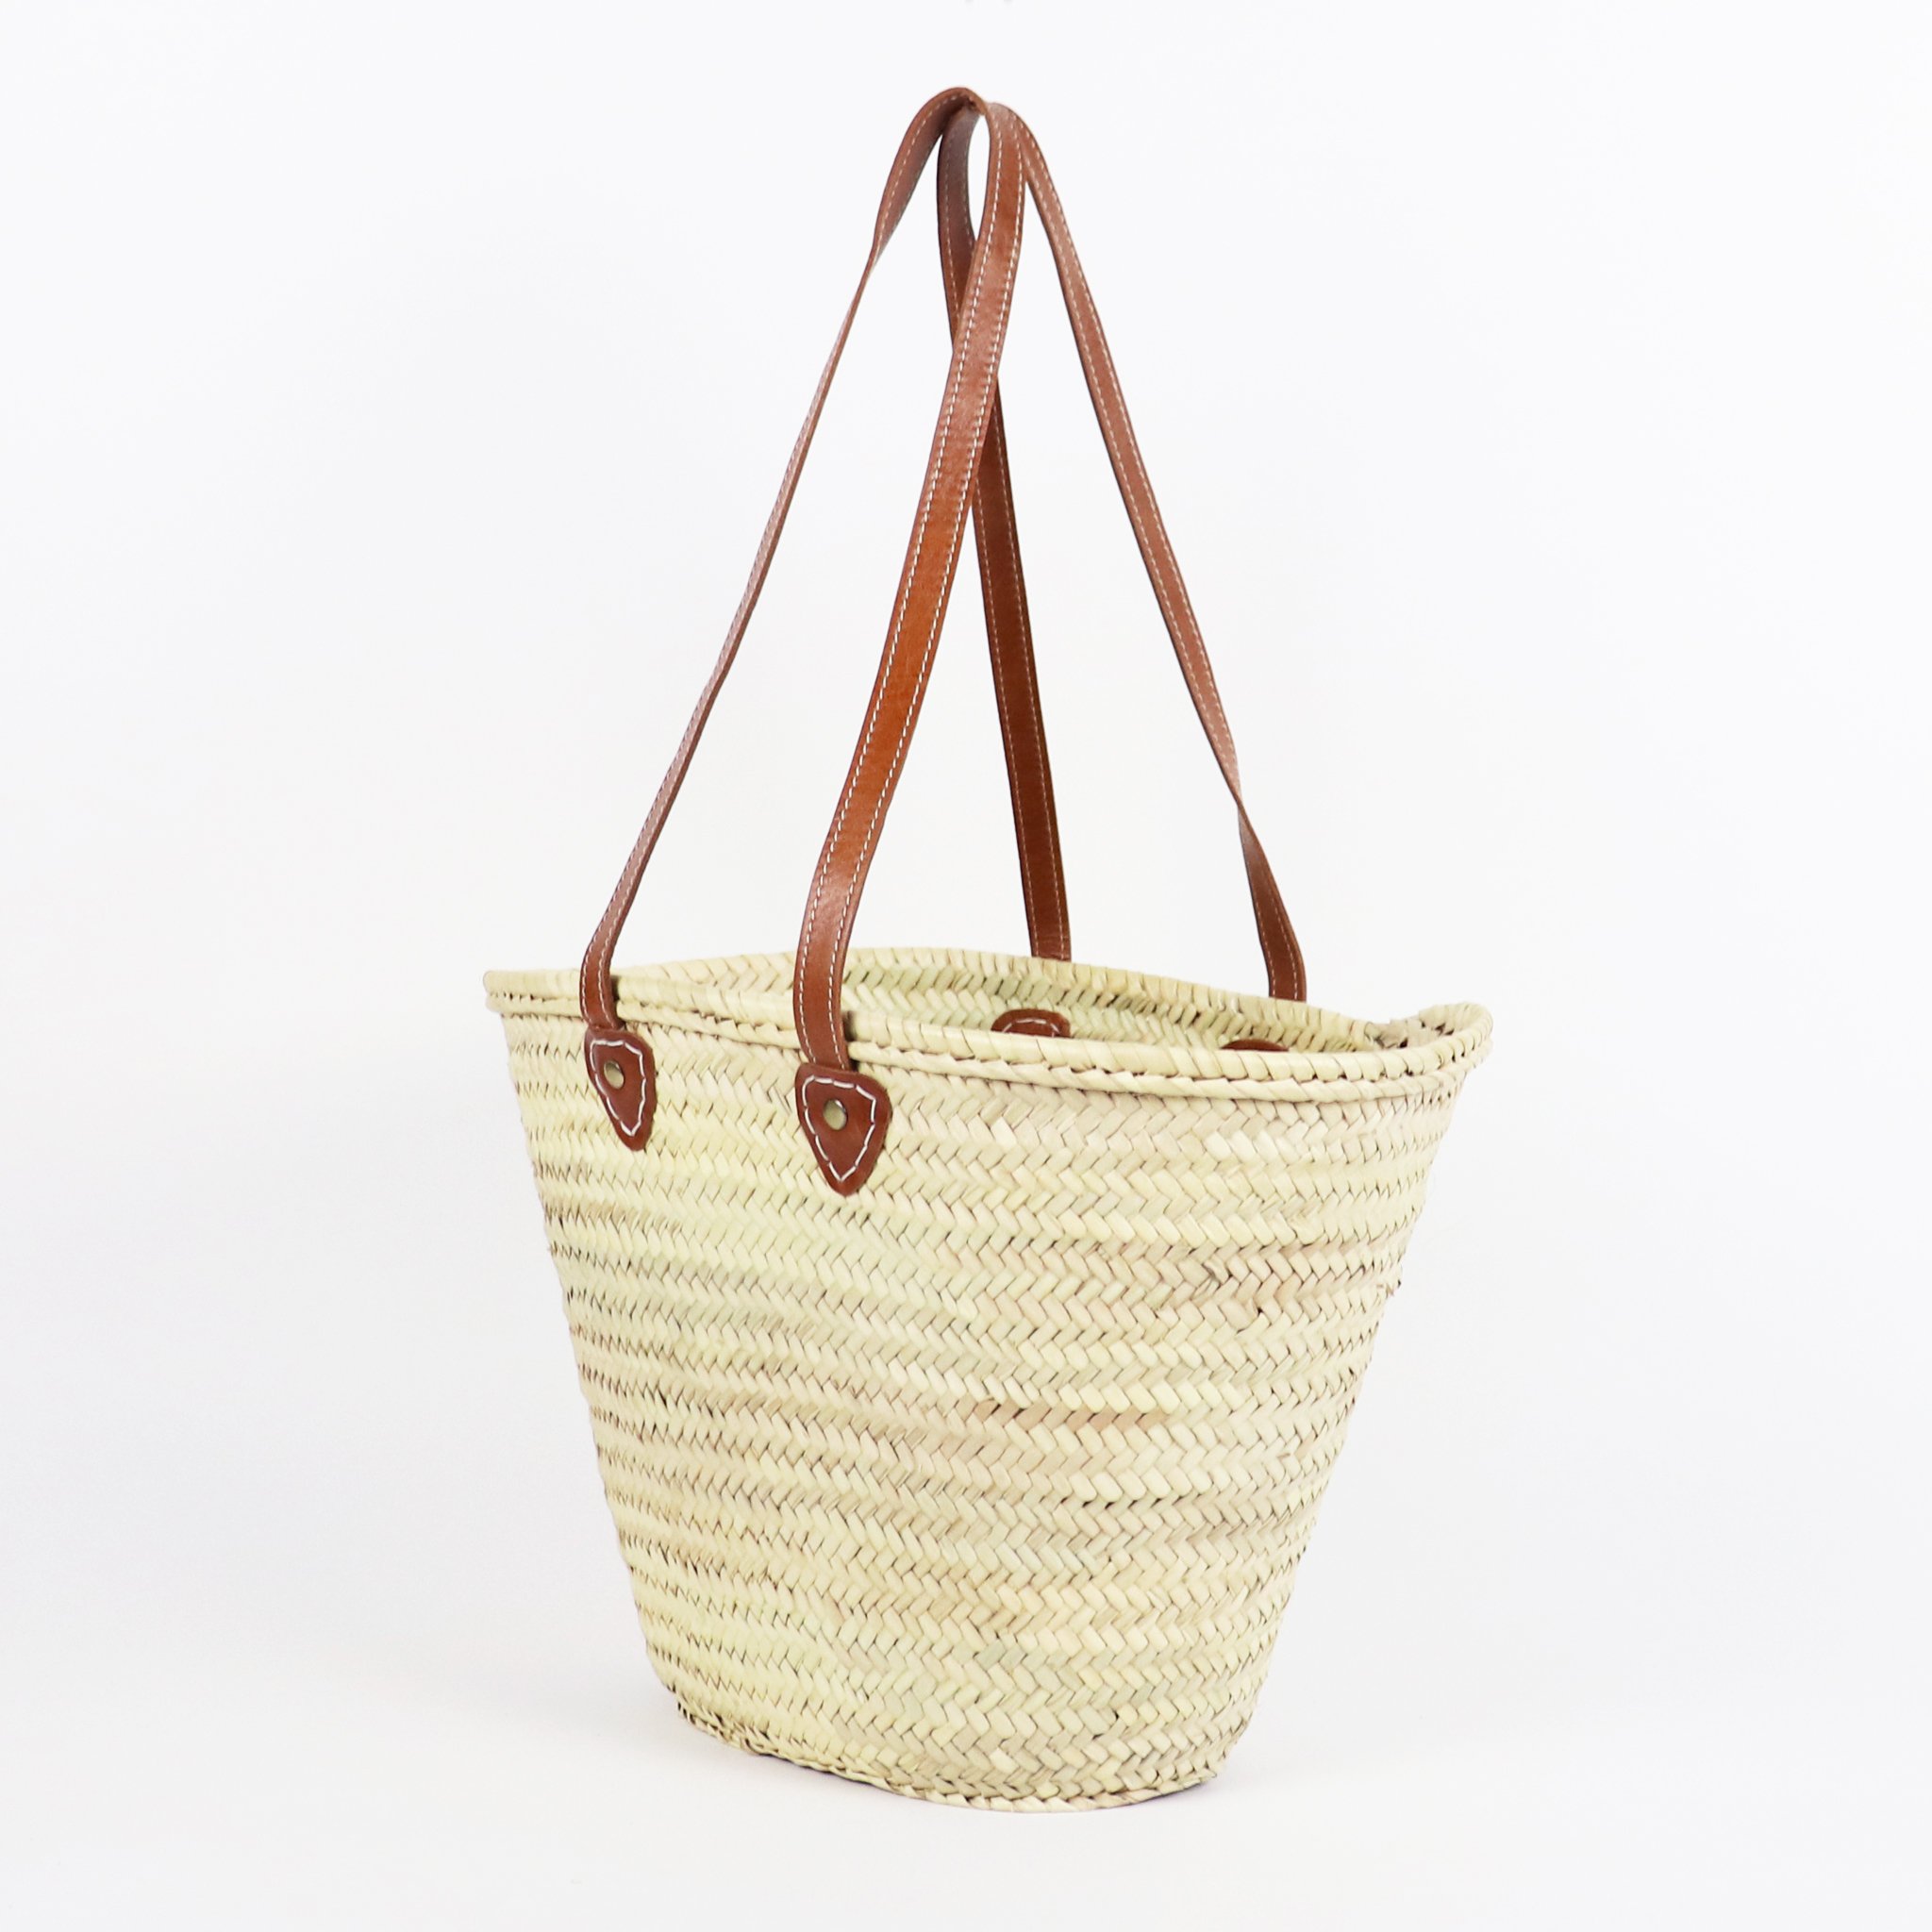  FRENCH BASKET straw bag with leather handles beach bag, straw  bag, french market basket, summer basket bag : Handmade Products